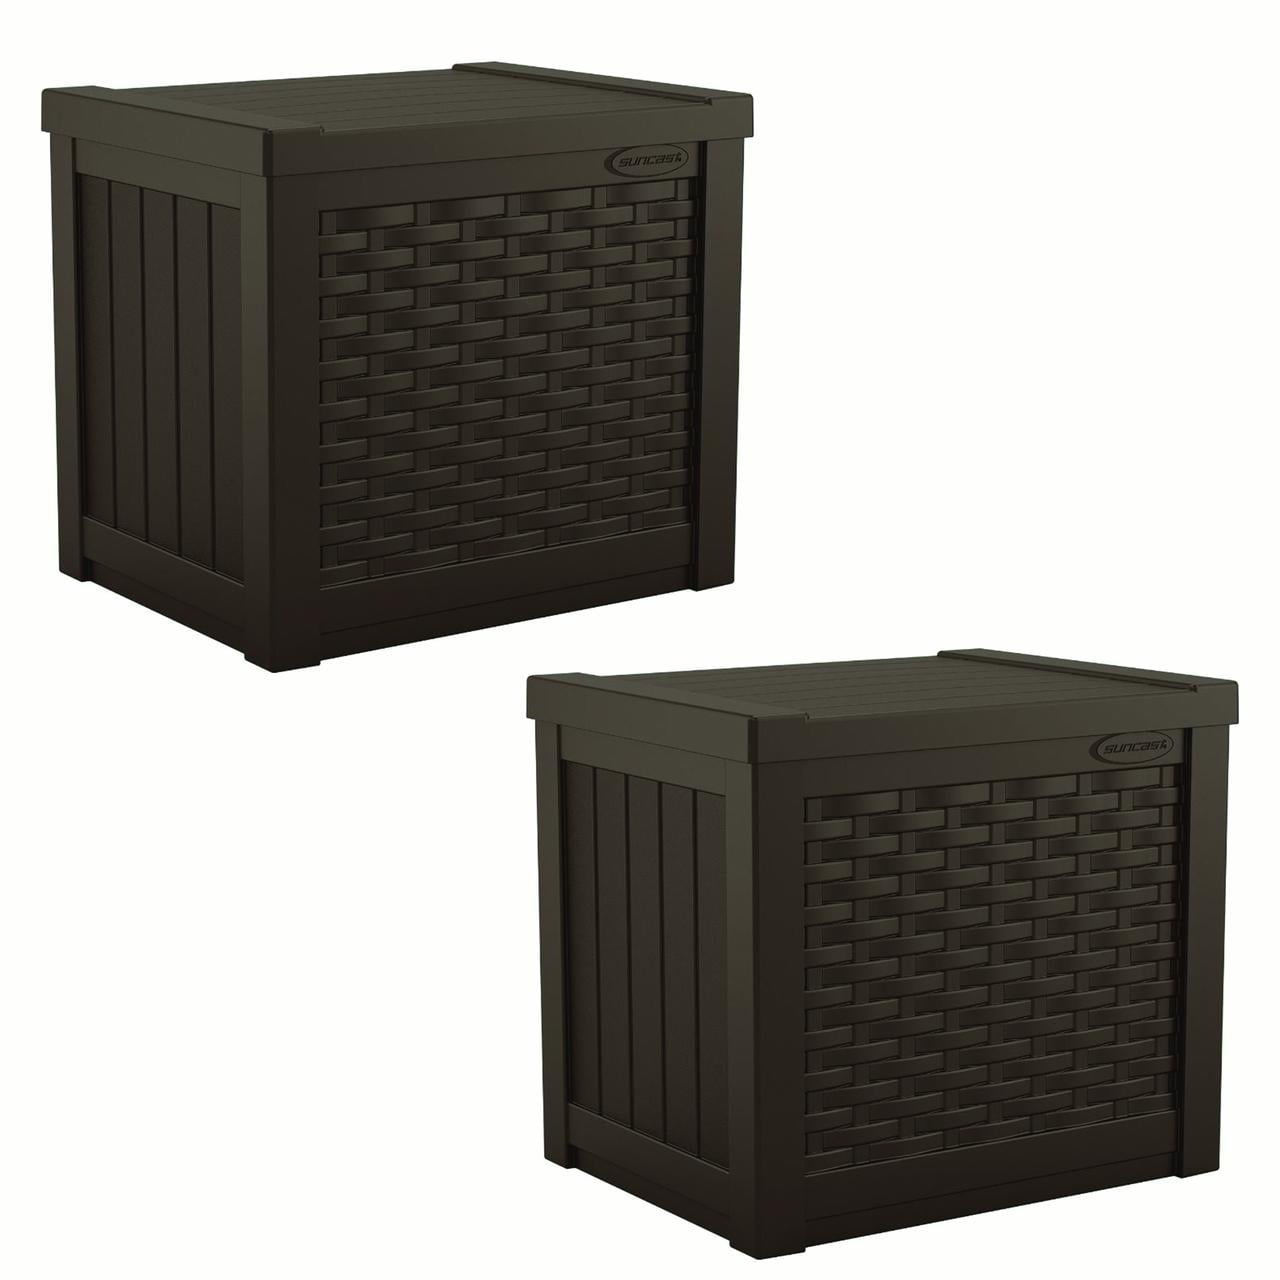 Wooden Sheds At Home Depot 91, Resin Wicker Patio Storage Box Image